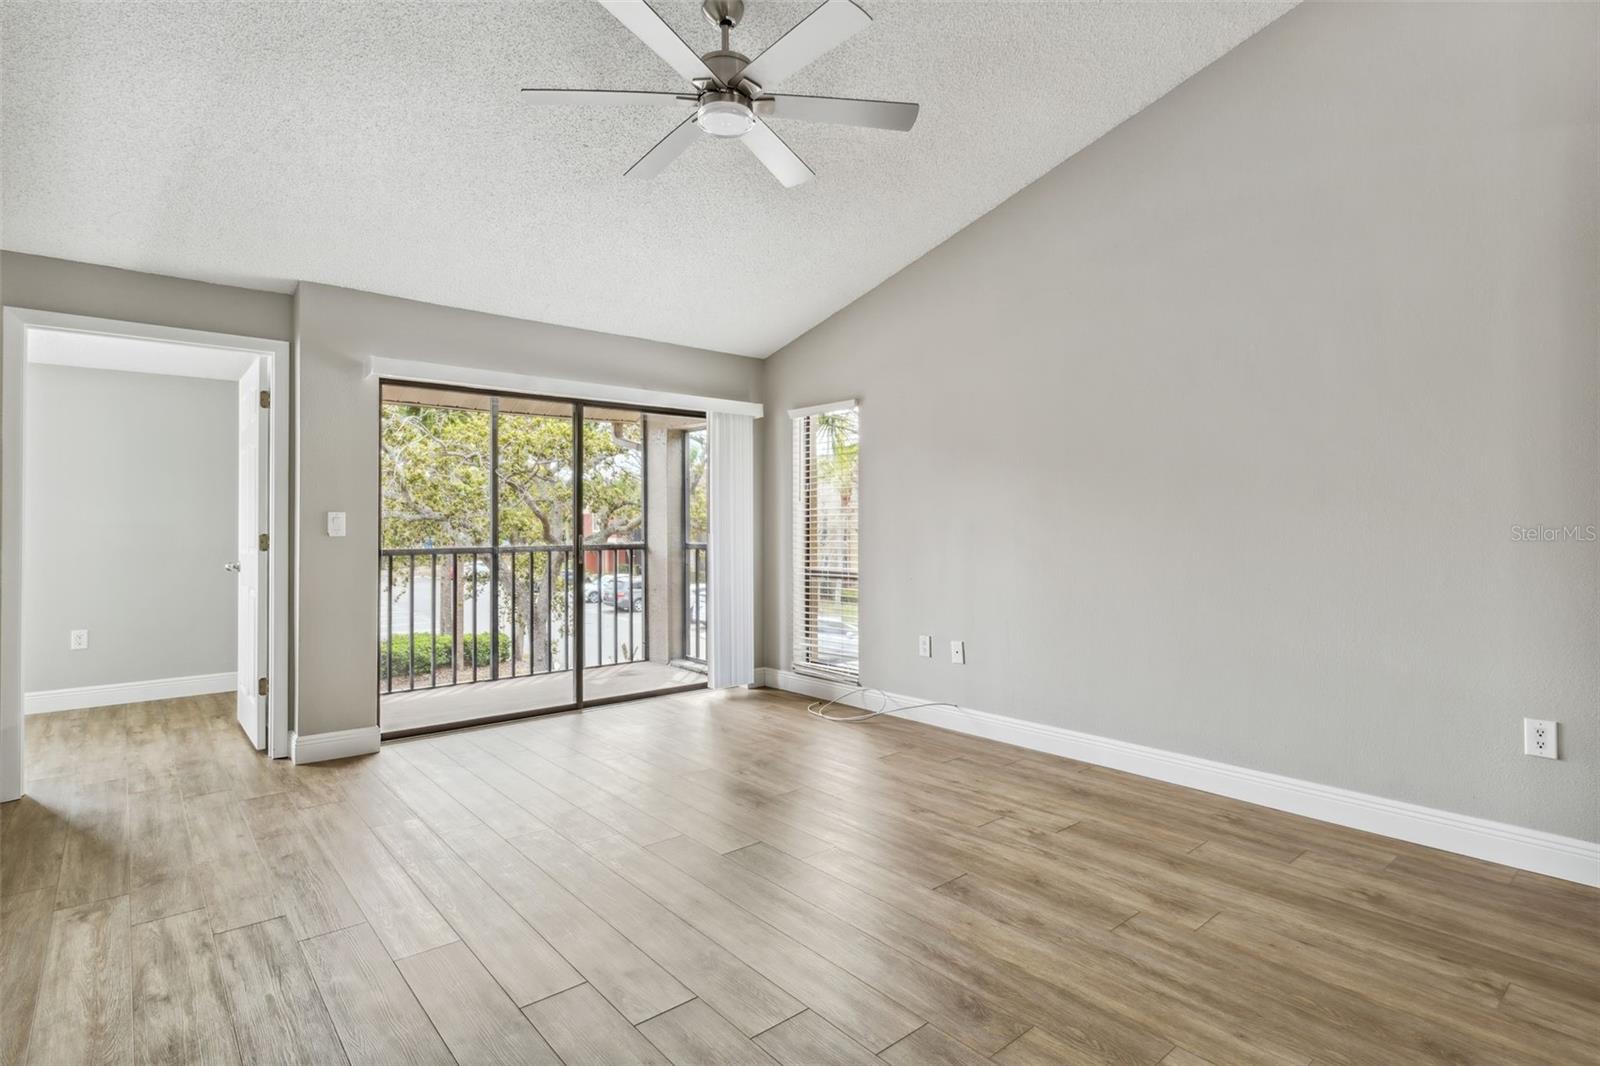 Brand new ceiling fan/light for comfortable air flow. The brand new luxury vinyl flooring throughout the unit makes your space cohesive and is the first thing to draw your attention!